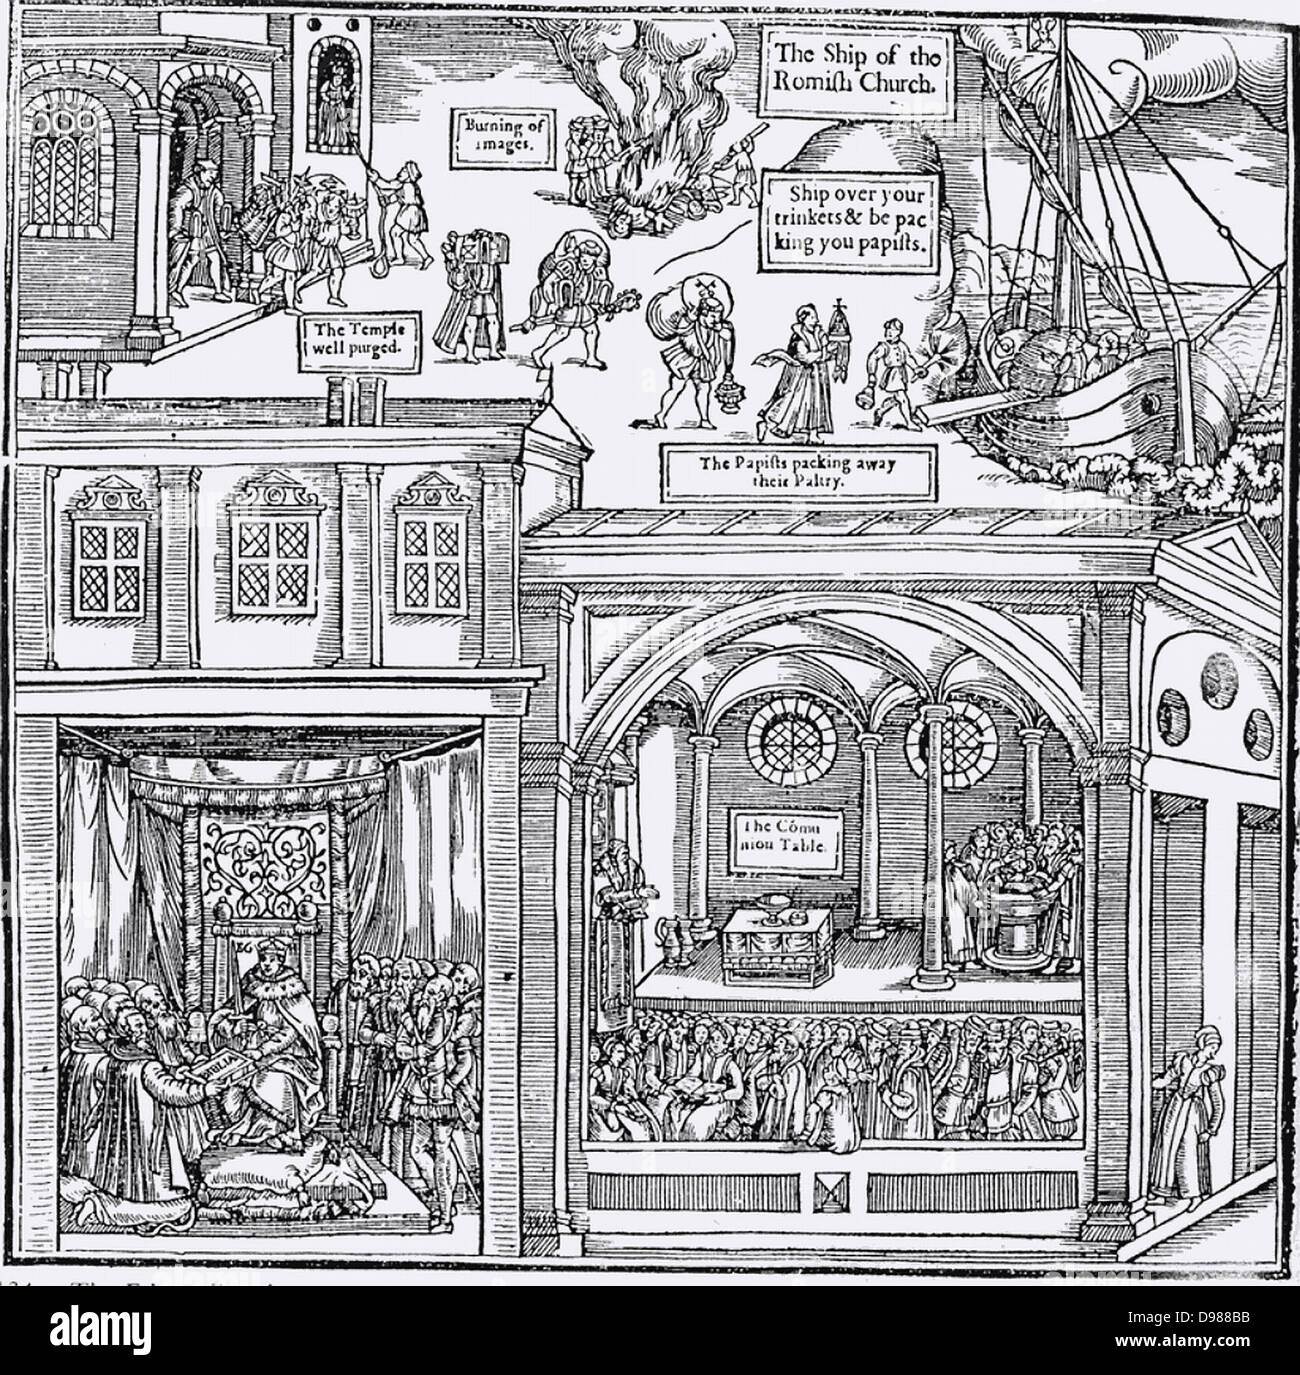 Woodcut from the first edition of John Foxe 'The Book of Martyrs', London 1563, depicting iconoclasm, centre top. In the top part of the image 'papists' are packing away their 'paltry,' while the church is purged of idols. At bottom left clerics receive the Bible from Queen Elizabeth I. Bottom right shows the interior of a Protestant church with the congregation listening to a sermon, a somple Communion table rther than an altar, and a Baptism taking place. Stock Photo